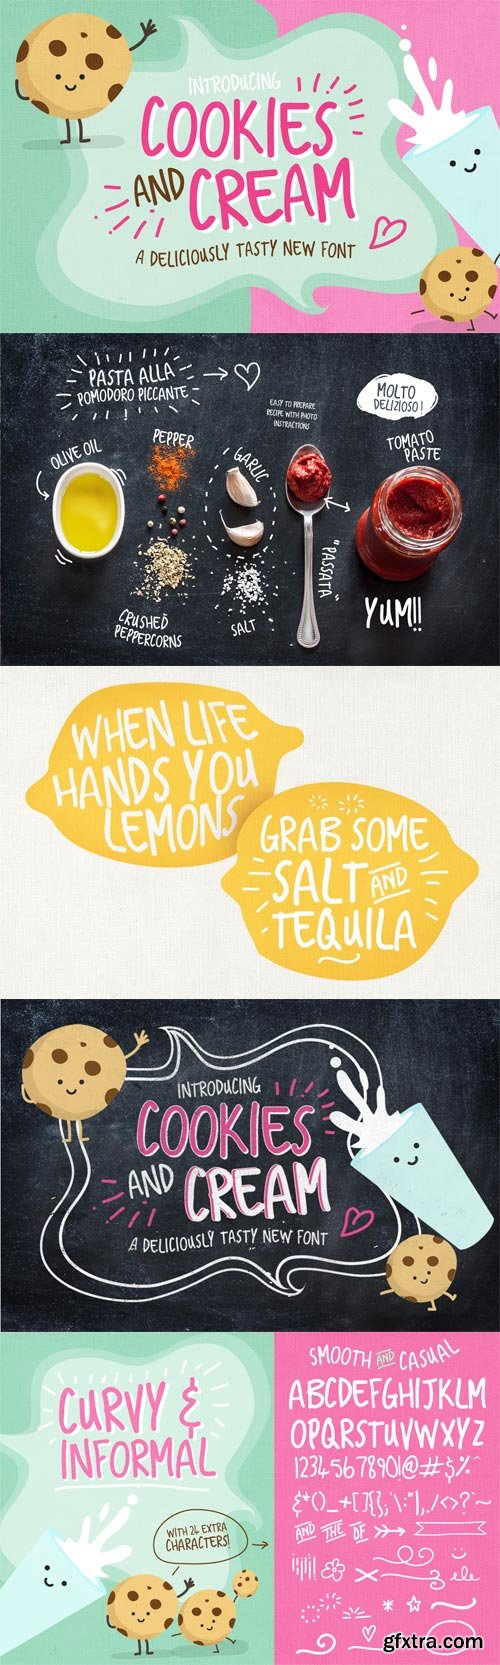 Cookies and Cream Font Family - 2 Fonts for $15